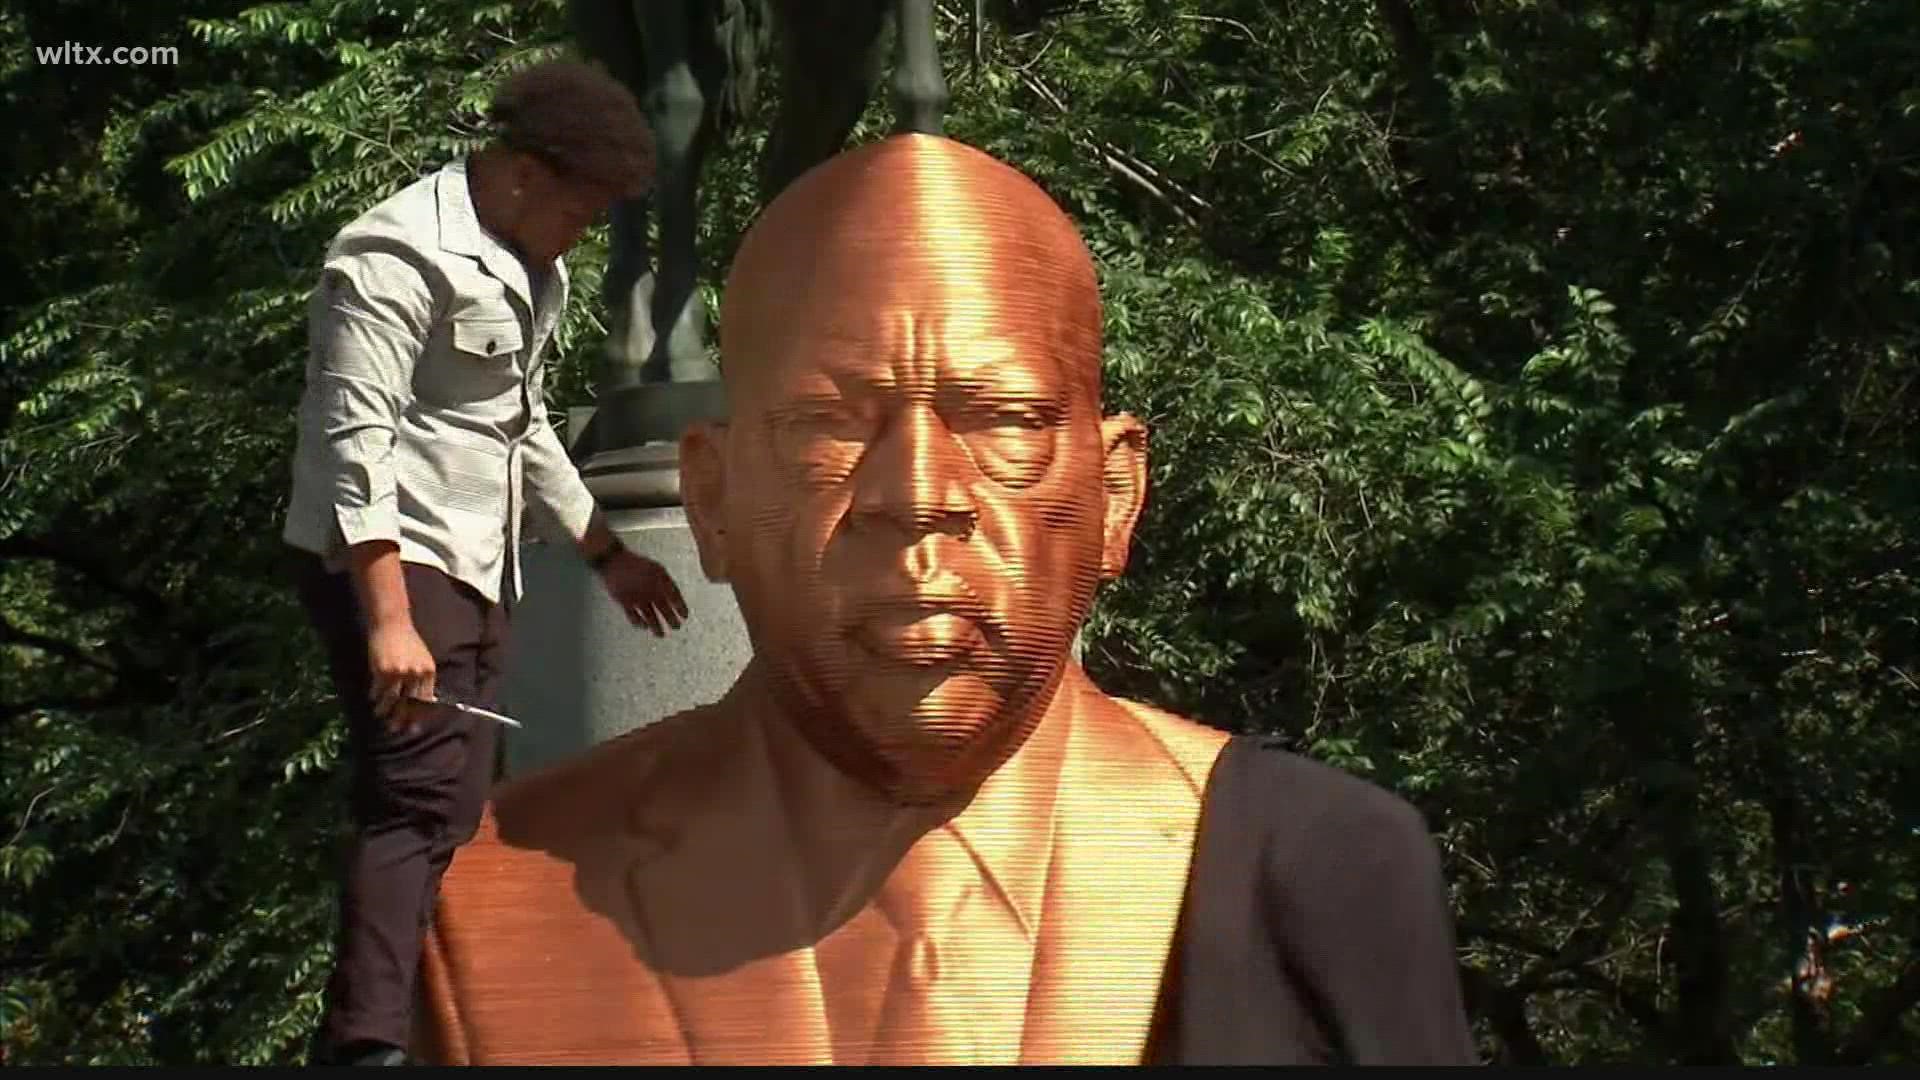 Made of wood, the new Brookland statues demand social justice and include, George Floyd, Breonna Taylor, and John Lewis. They were unveiled on Thursday.